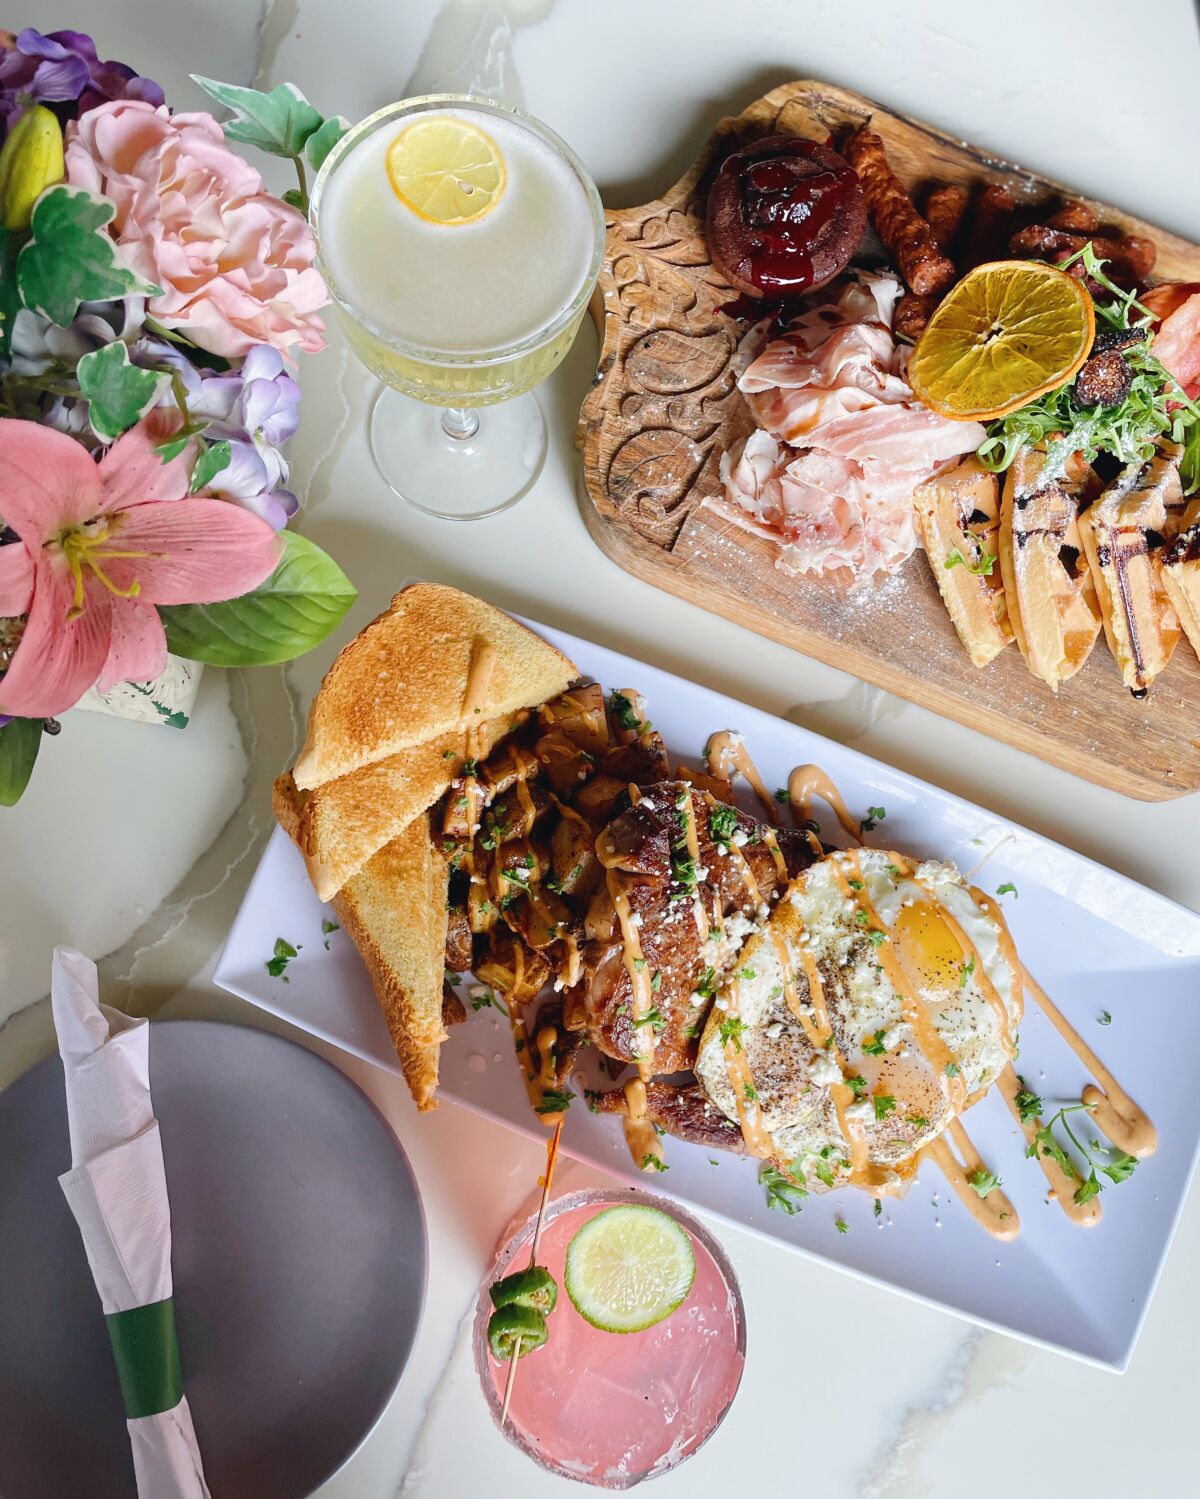 Rusticucina in Hillcrest will serve brunch charcuterie boards on Easter Sunday.